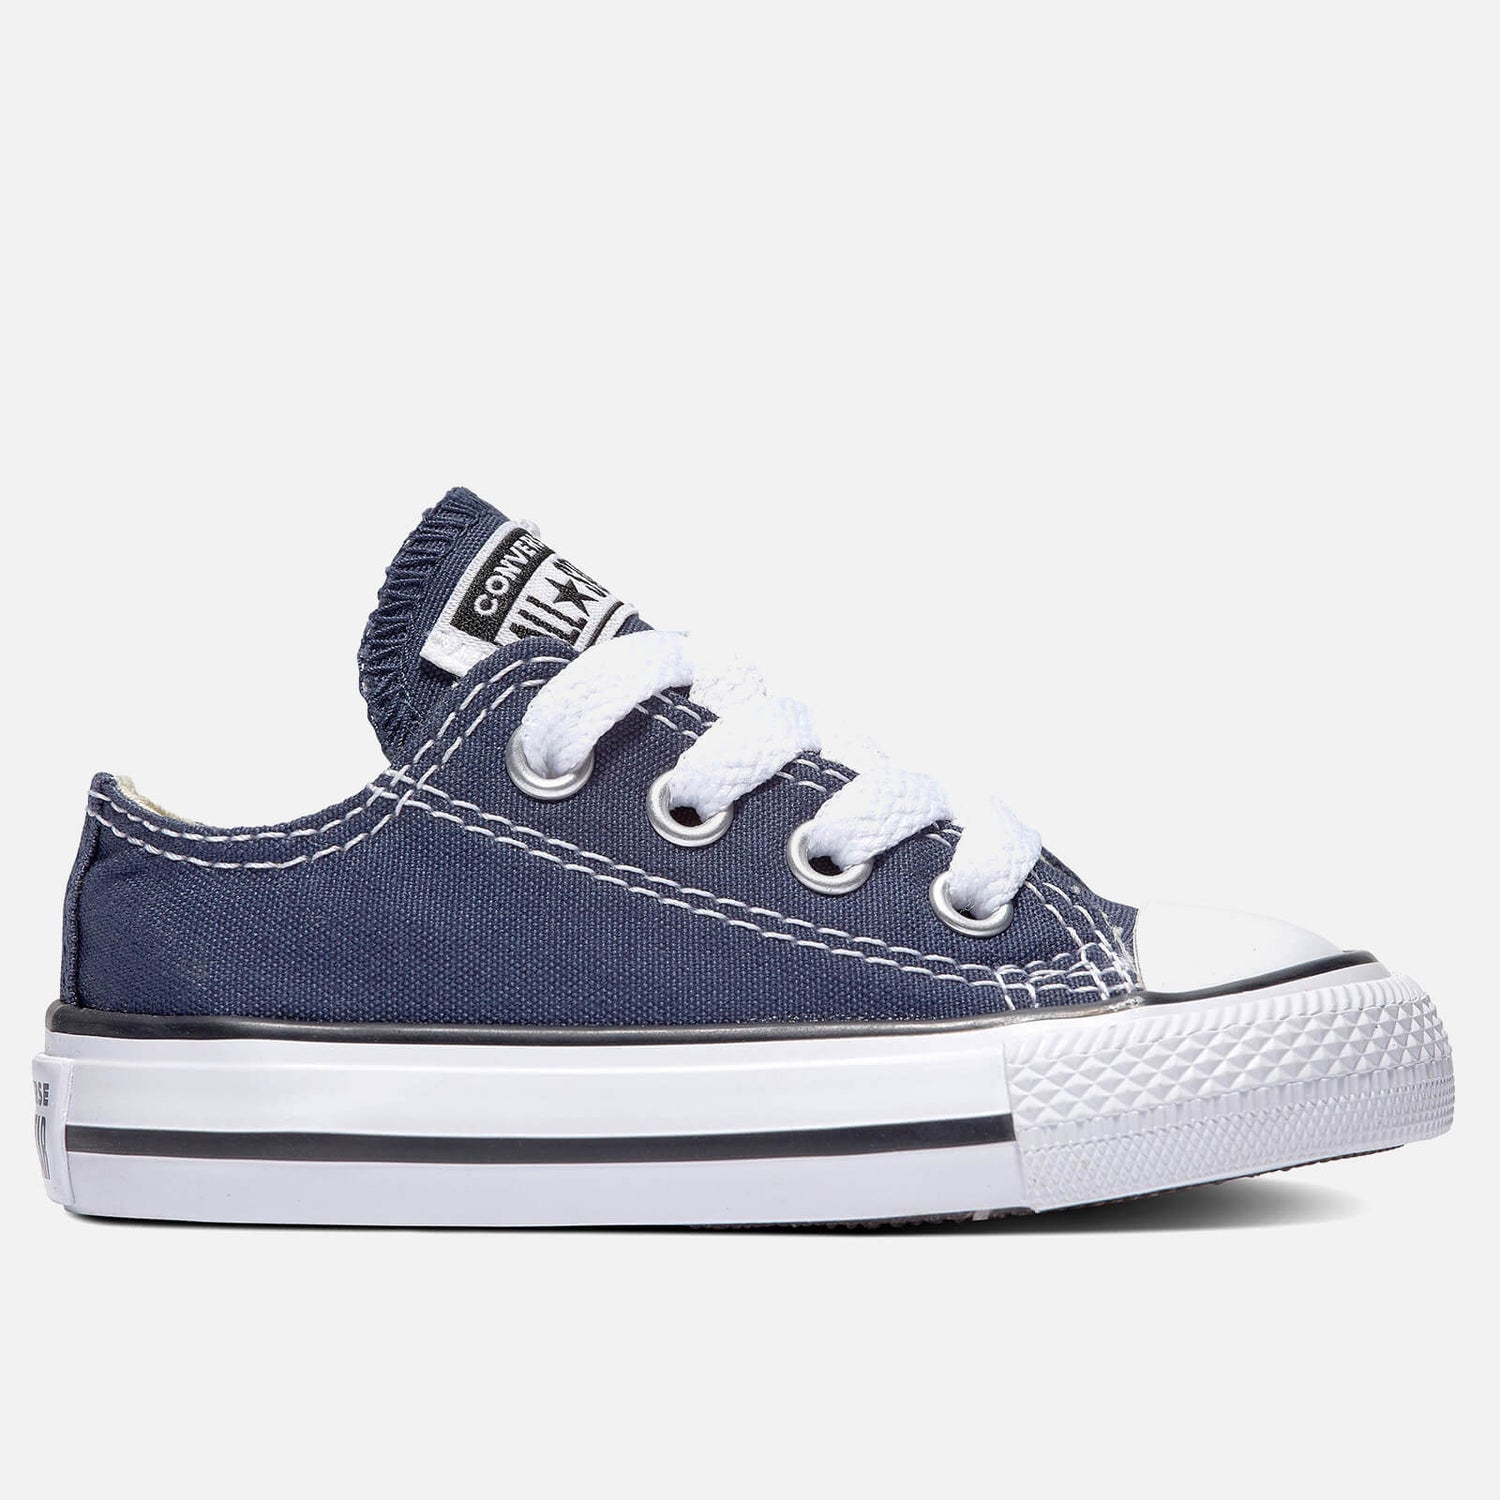 Converse Toddlers' Chuck Taylor All Star Ox Trainers - Navy - UK 3 Toddler